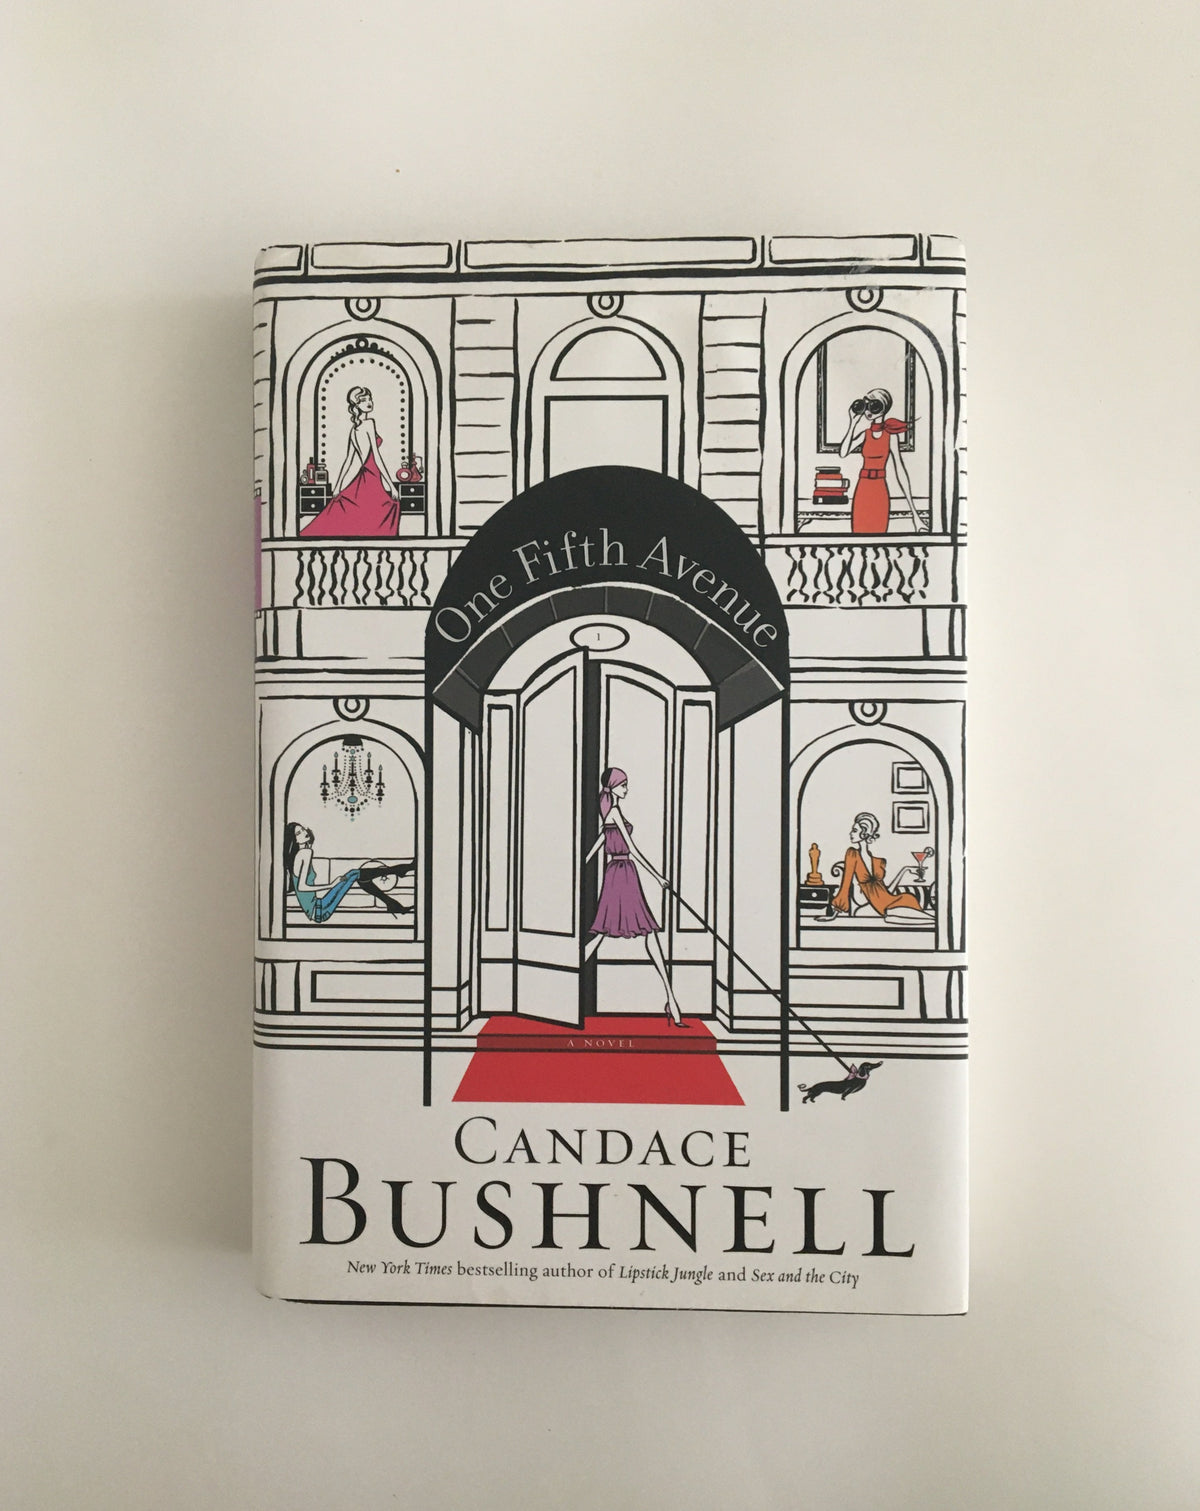 One Fifth Avenue by Candice Bushnell